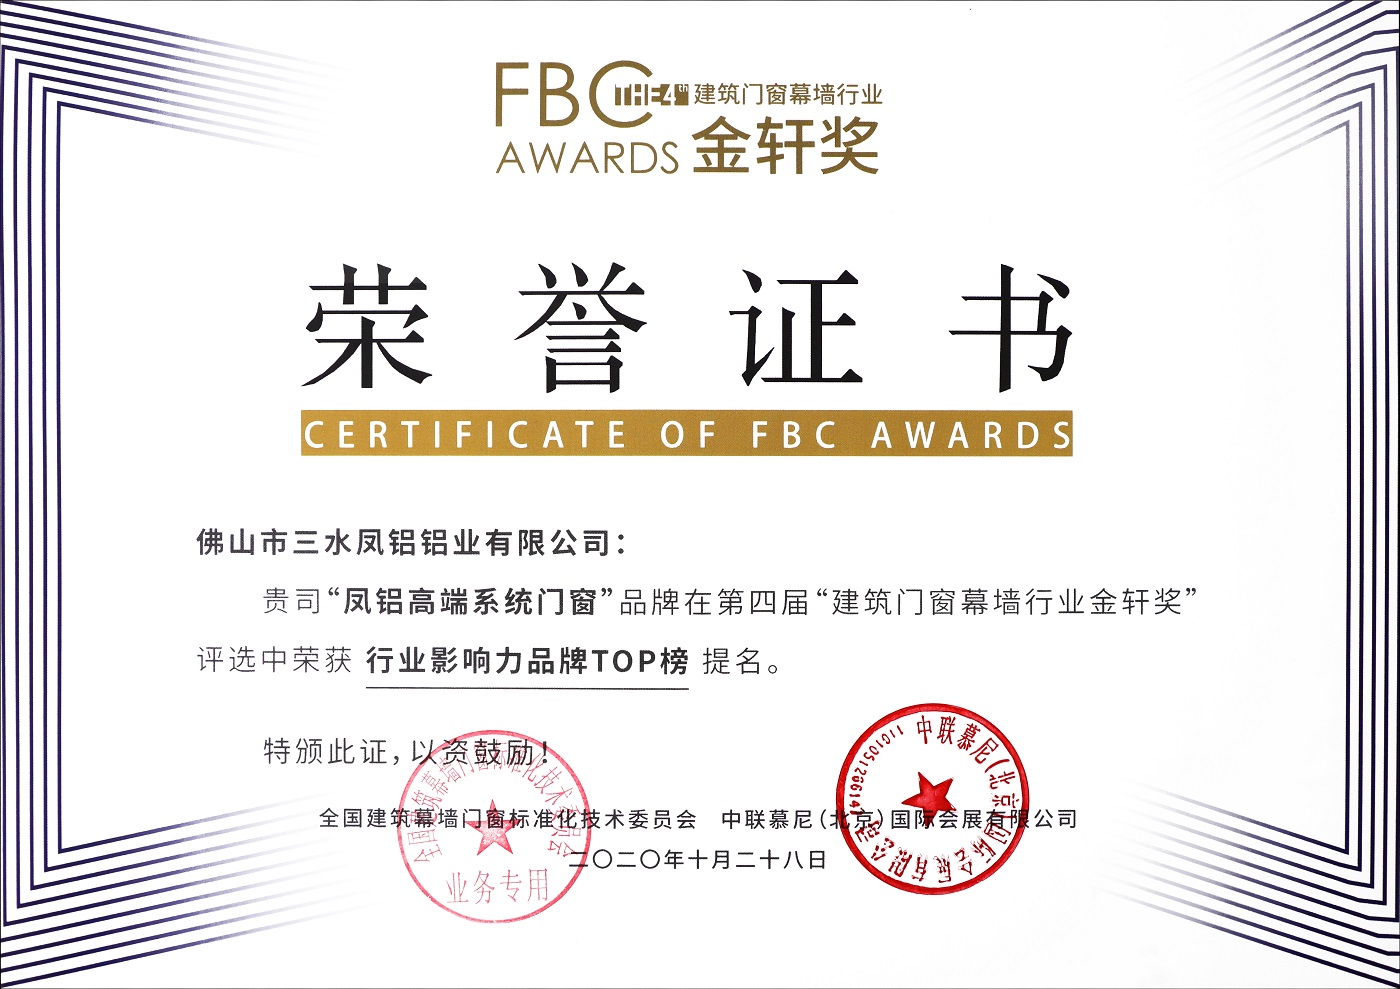 The fourth building doors and windows curtain wall industry in 2020 Jinxuan Award "industry influence brand TOP list".